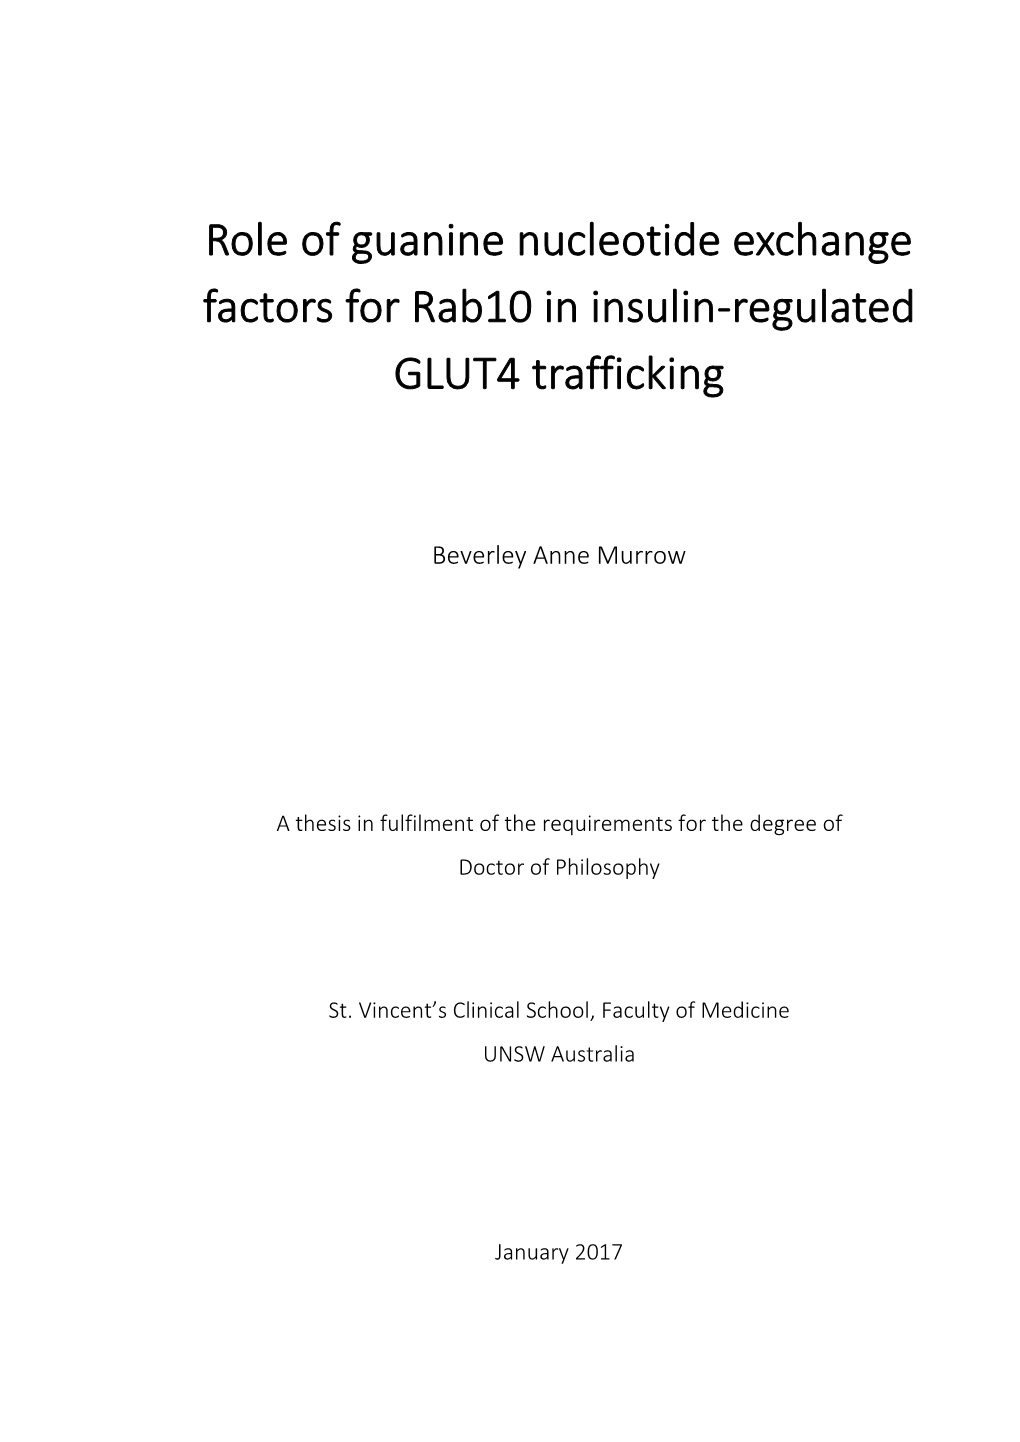 Role of Guanine Nucleotide Exchange Factors for Rab10 in Insulin-Regulated GLUT4 Trafficking